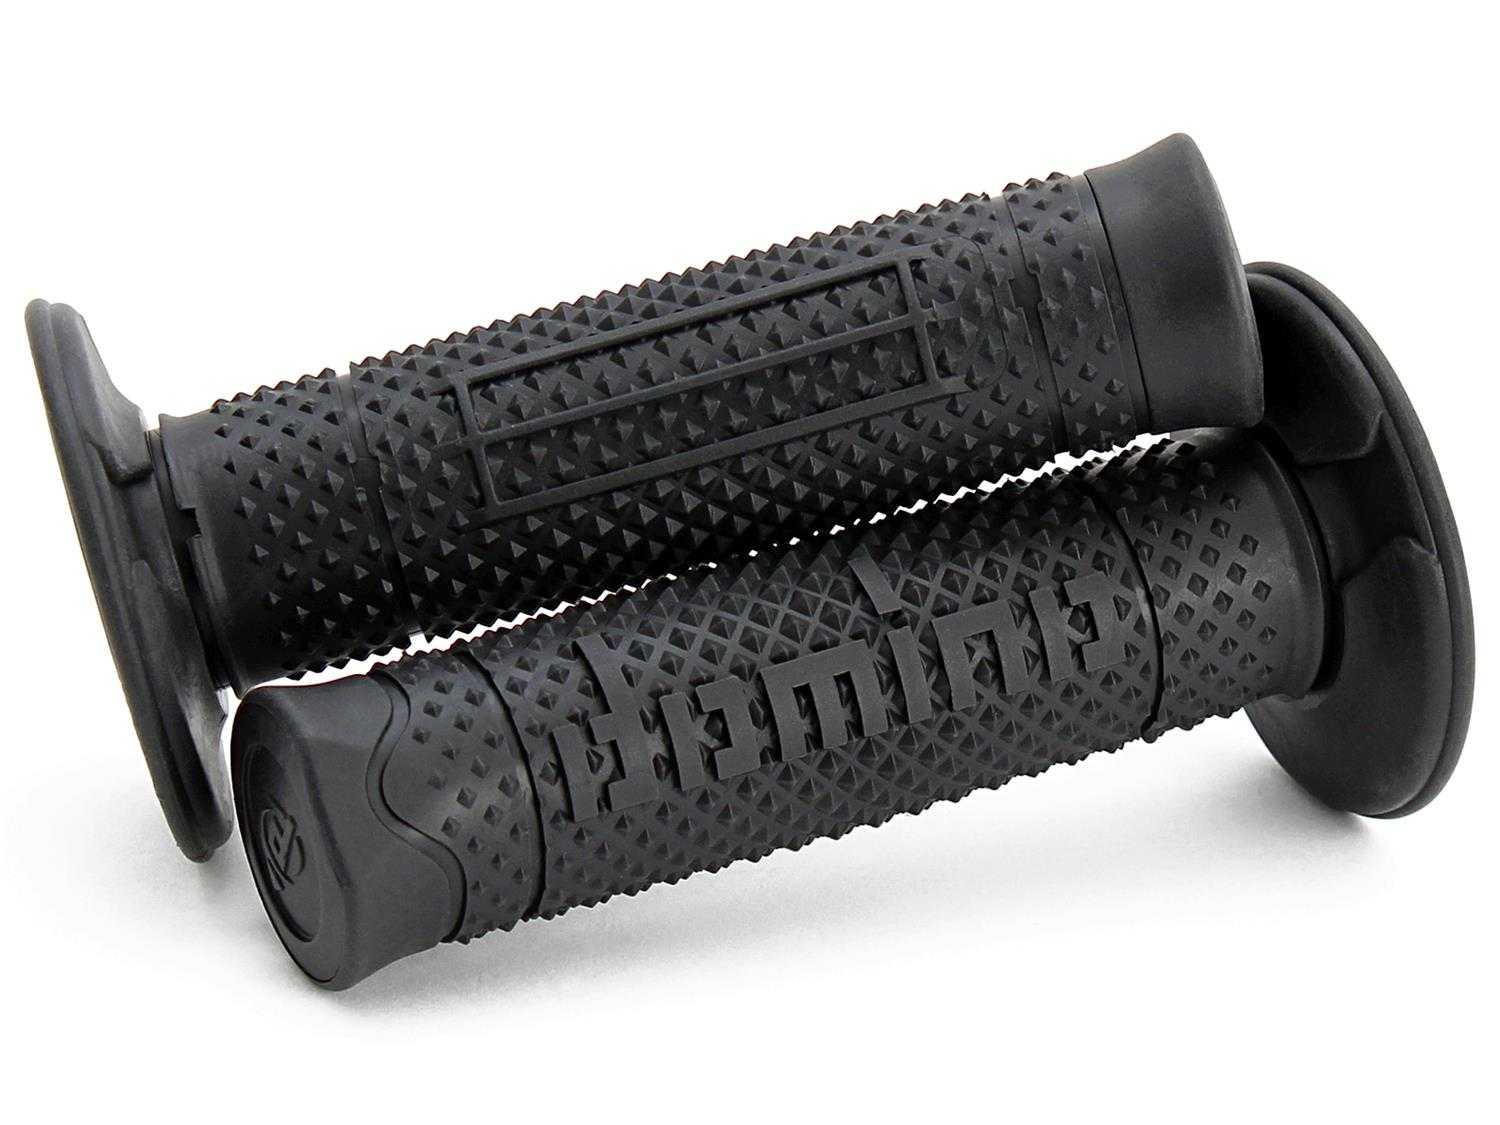 TOMMASELLI, Domino Off-Road Grips - A260 Coarse Dimple Monochrome DSH